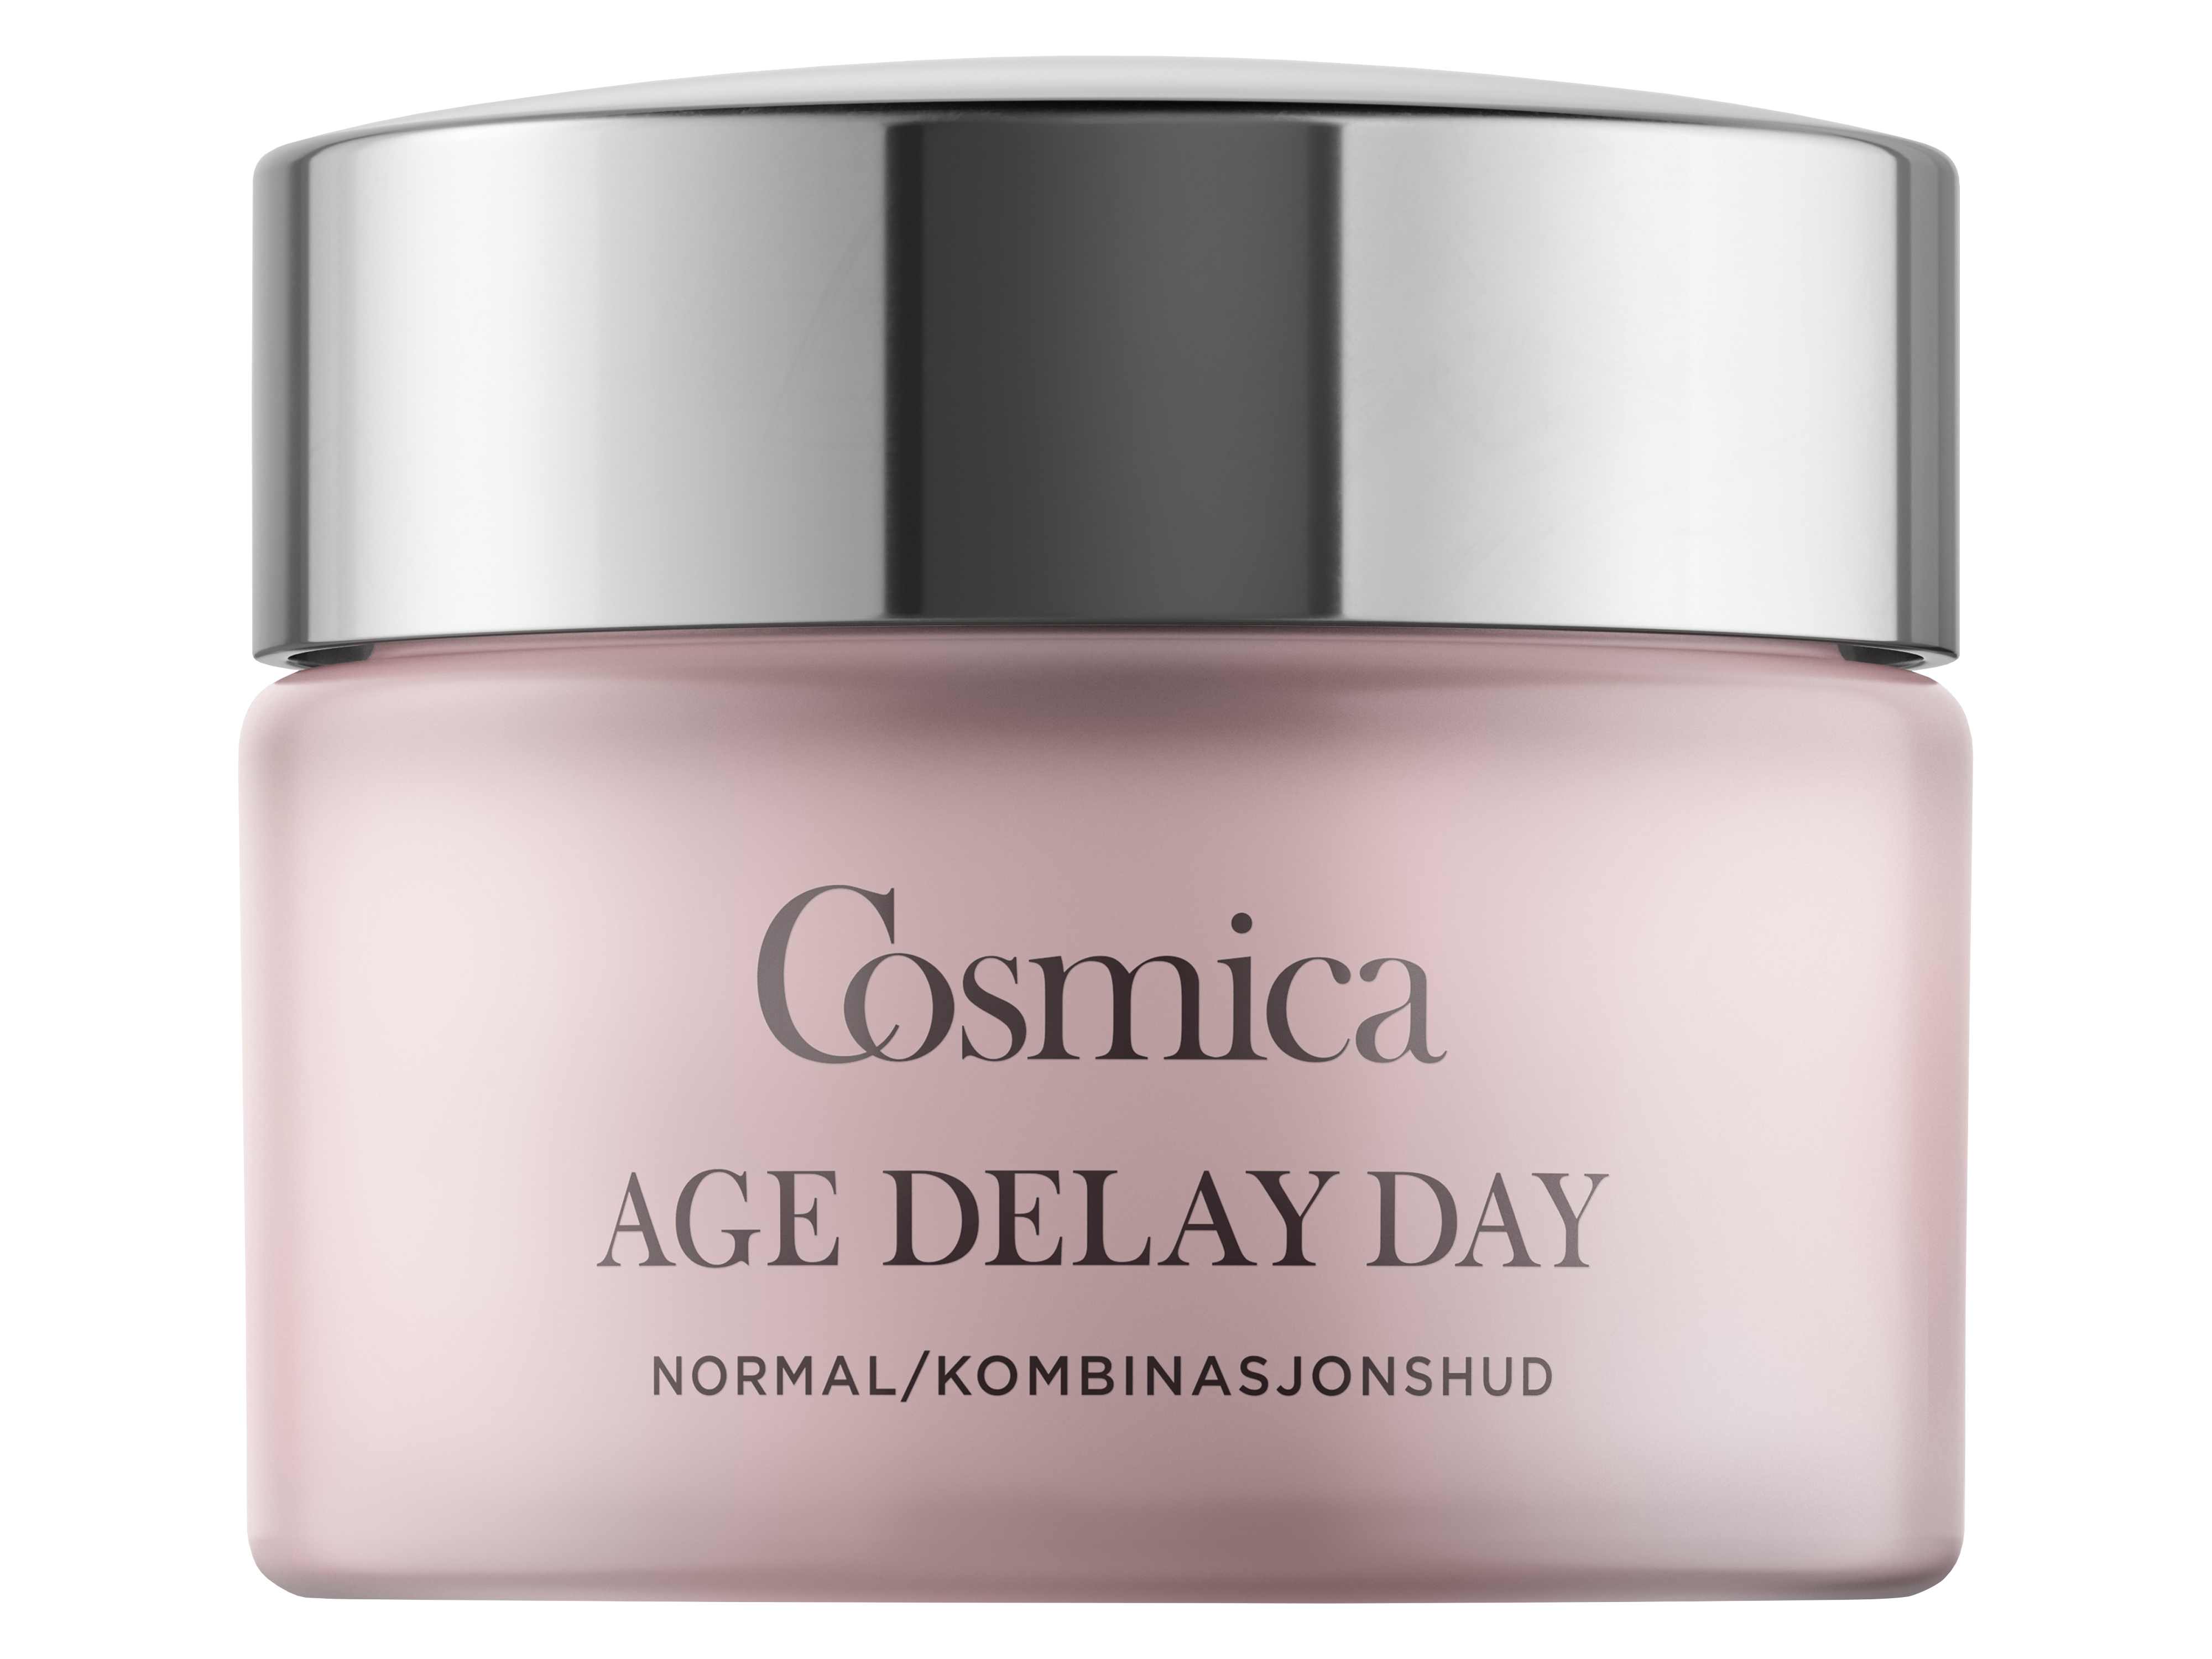 Cosmica Age Delay Day SPF15 Normal hud, 50 ml